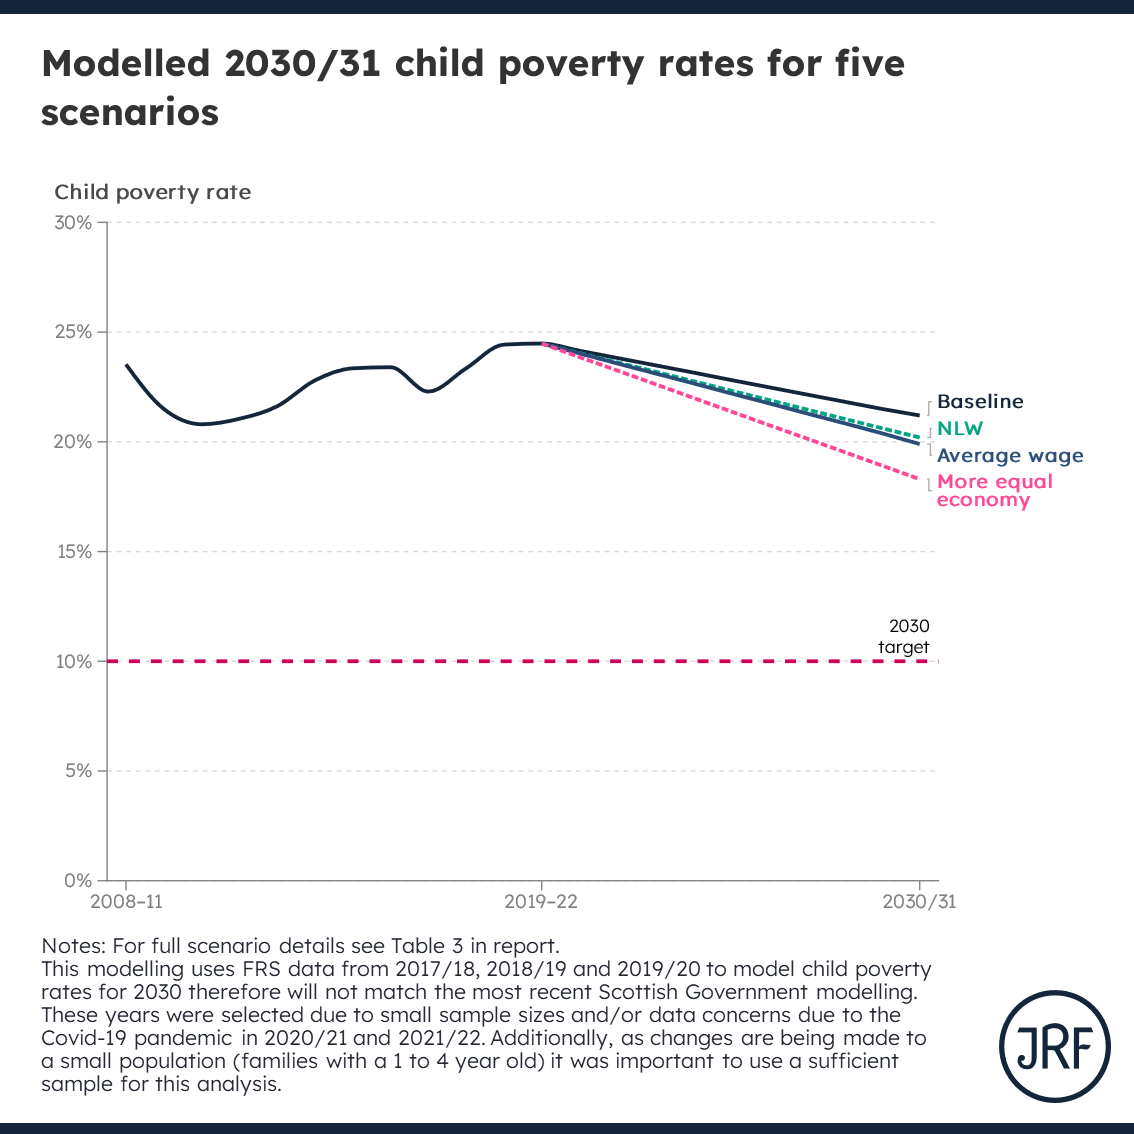 Yesterday we released a report looking at further expanding the early years childcare offer in Scotland focused on prioritising low income families and reducing poverty. We find that while it increases disposable incomes there is less of an impact on child poverty, why is this?